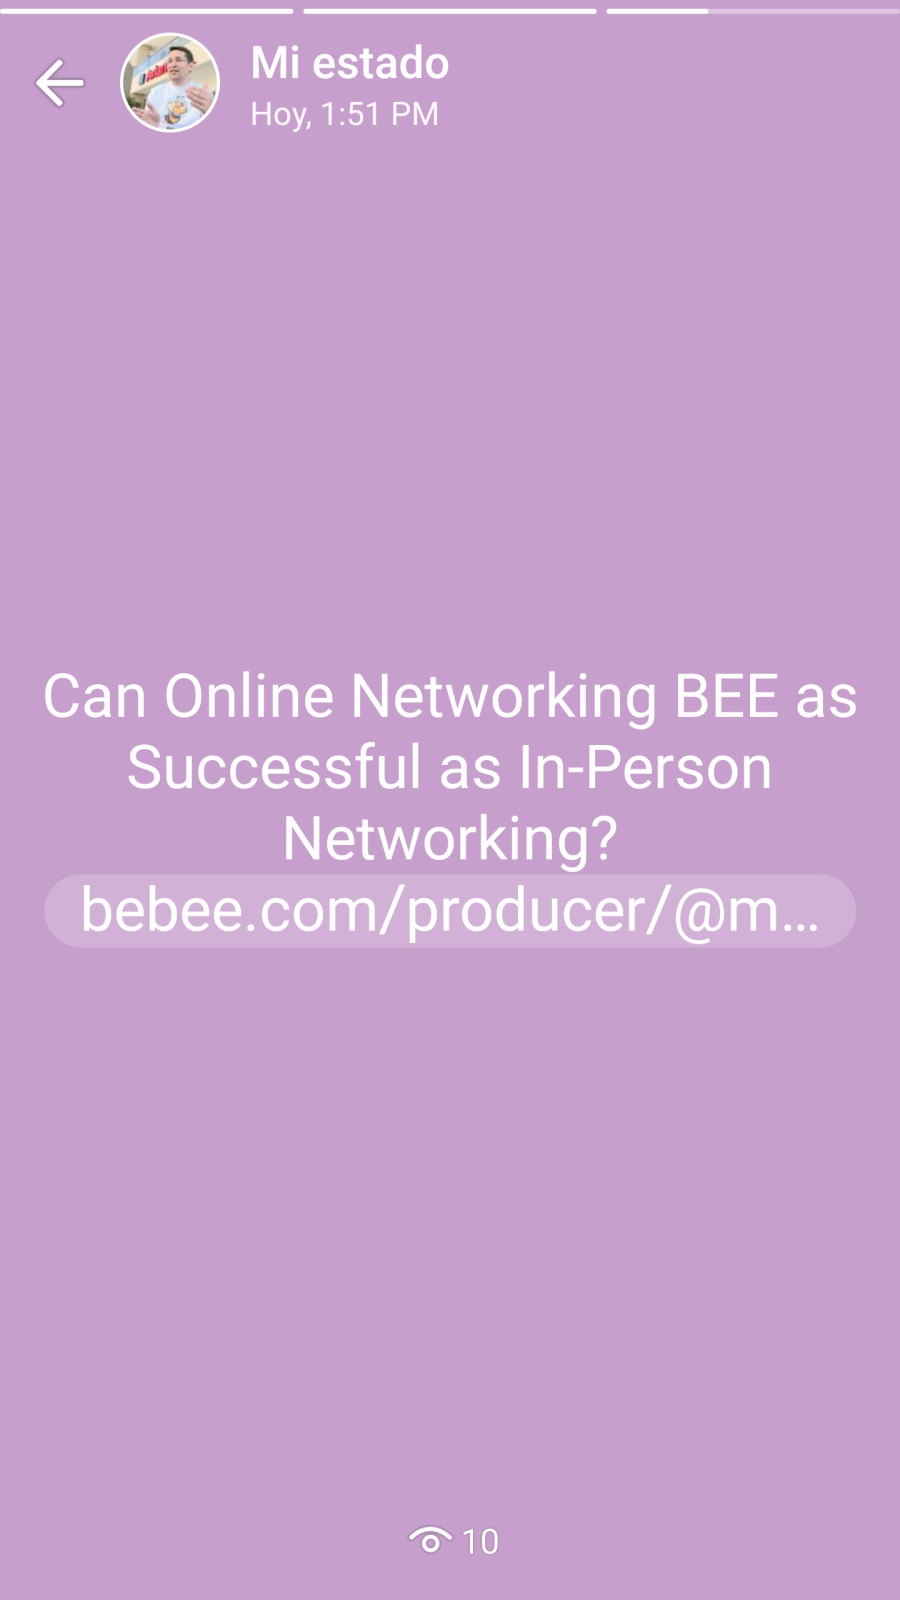 Mi estado
& / Hoy, 1:51 PM

Can Online Networking BEE as
Successful as In-Person
Networking?
bebee.com/producer/@m...